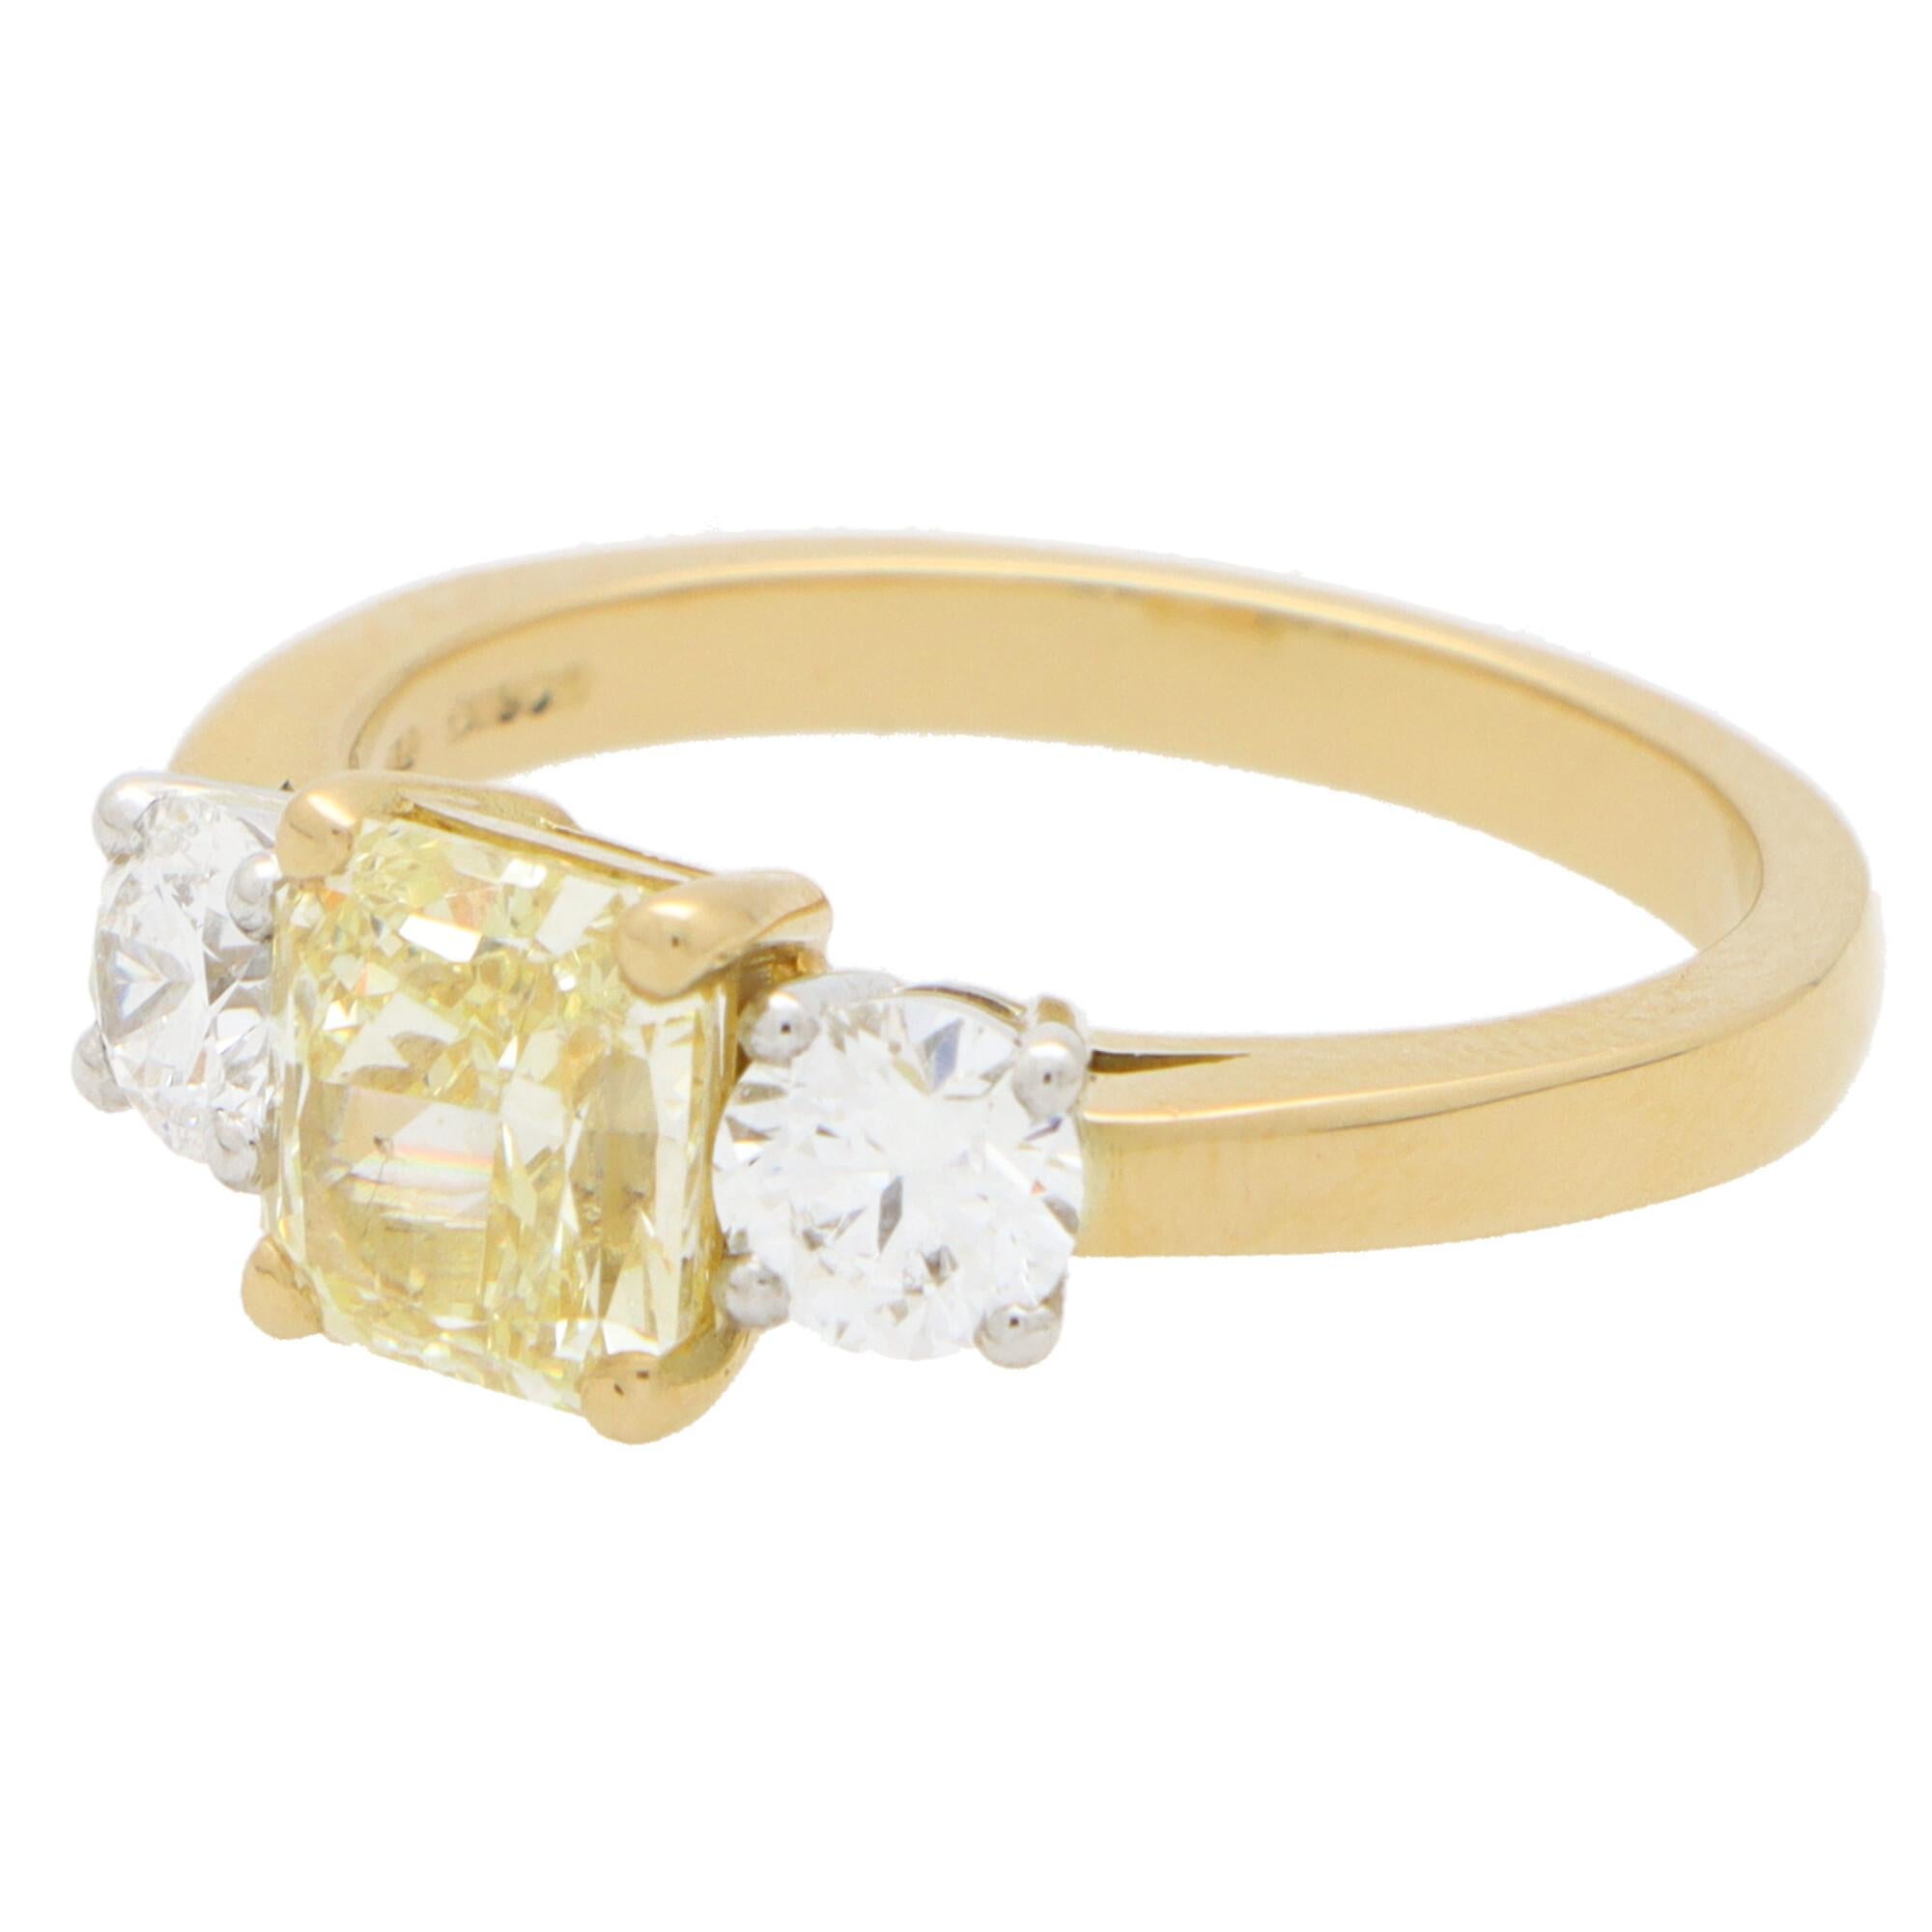 Modern GIA Certified Fancy Yellow Diamond Three Stone Engagement Ring in 18k Gold